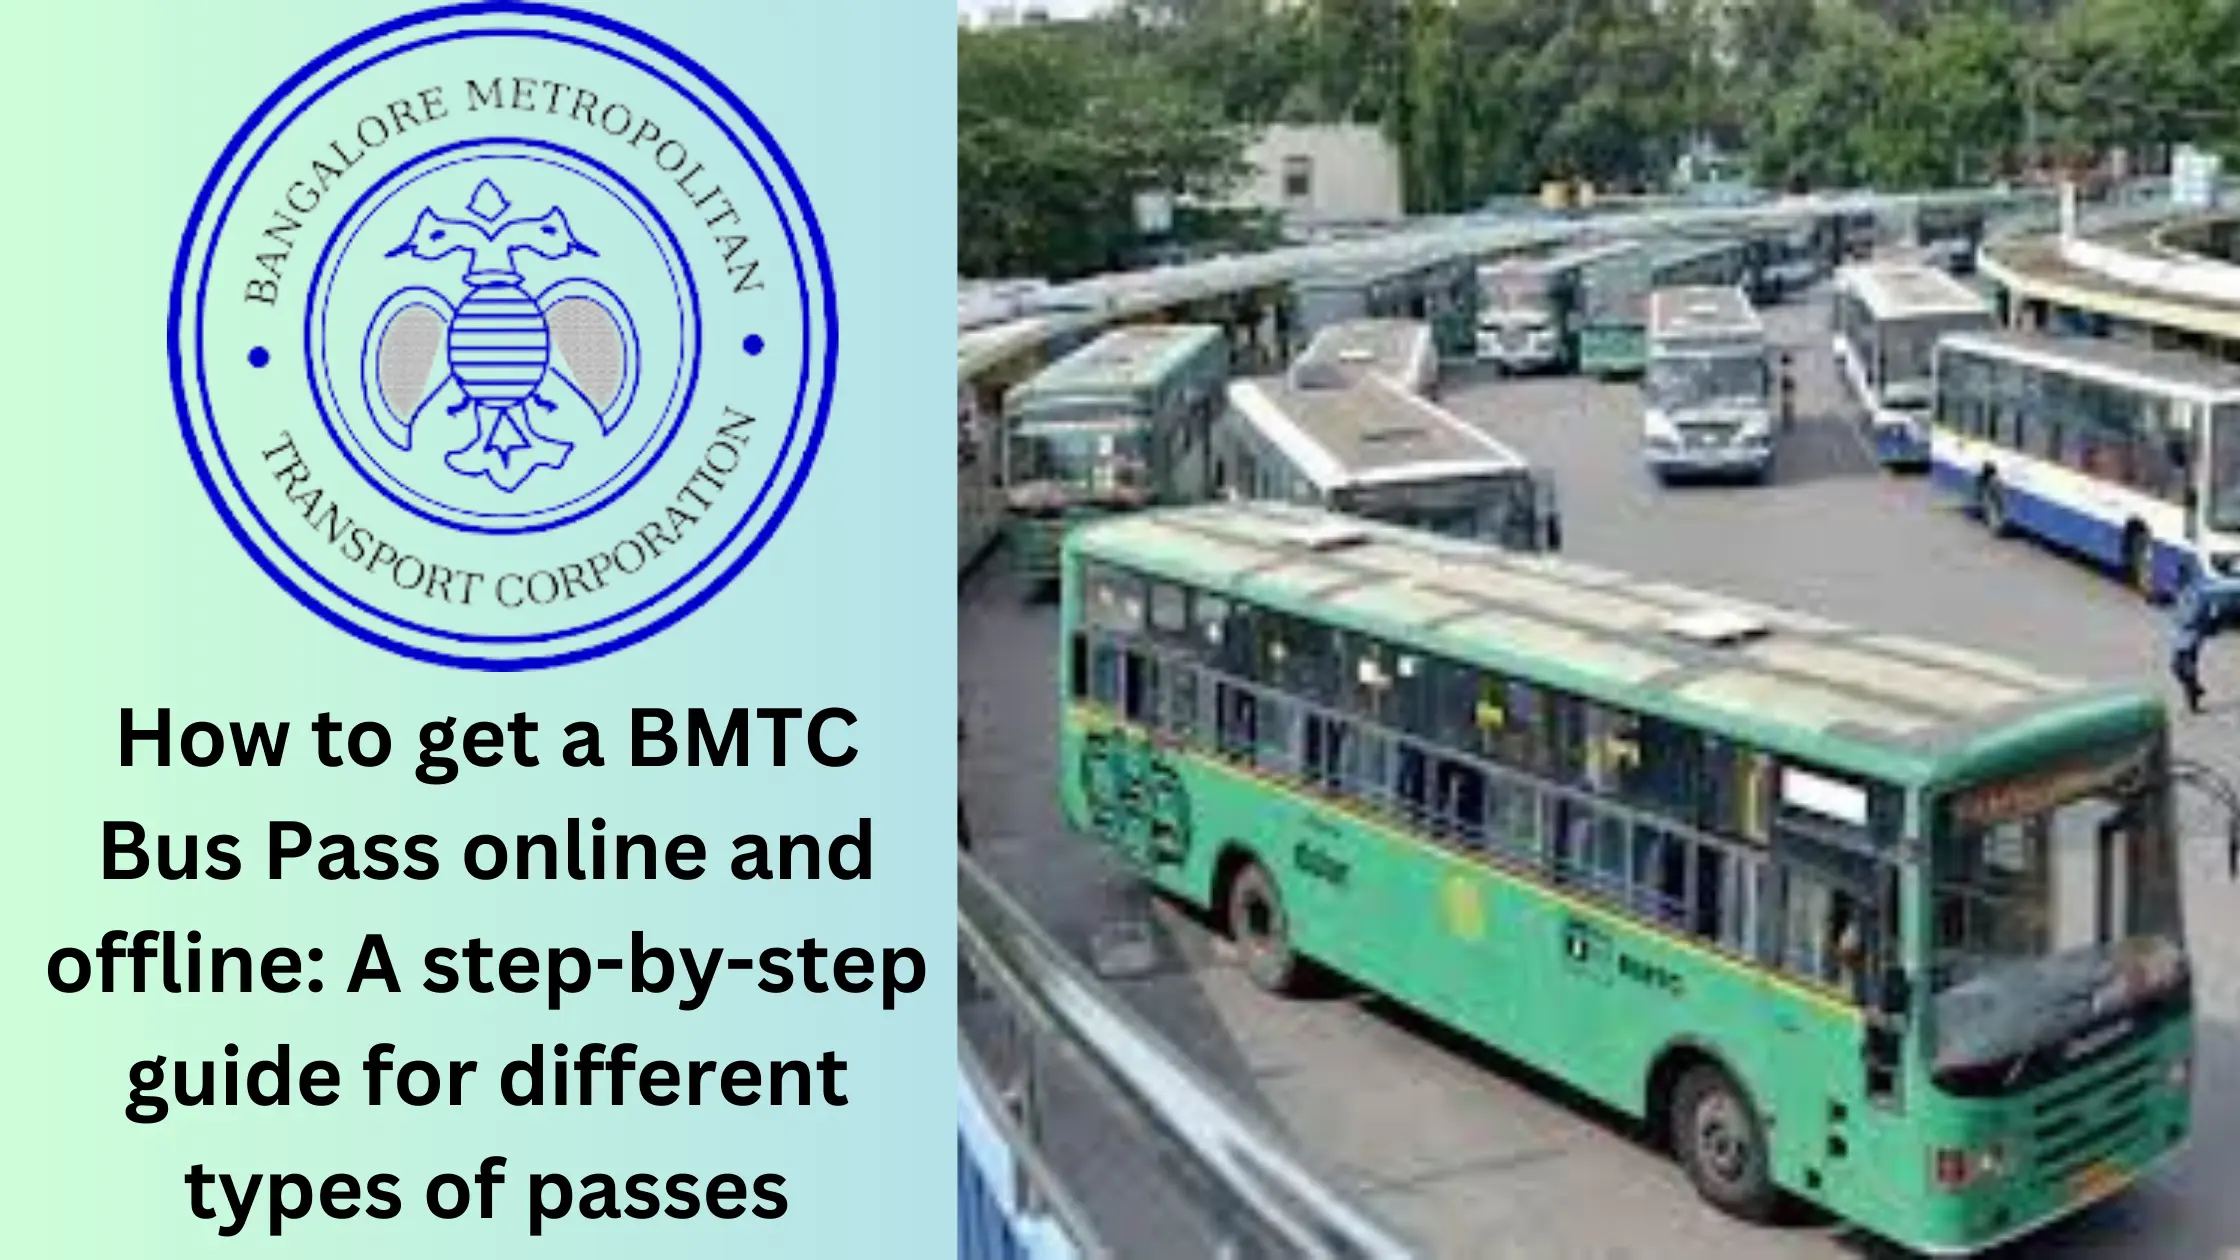 How to get a BMTC Bus Pass online and offline: A step-by-step guide for different types of passes